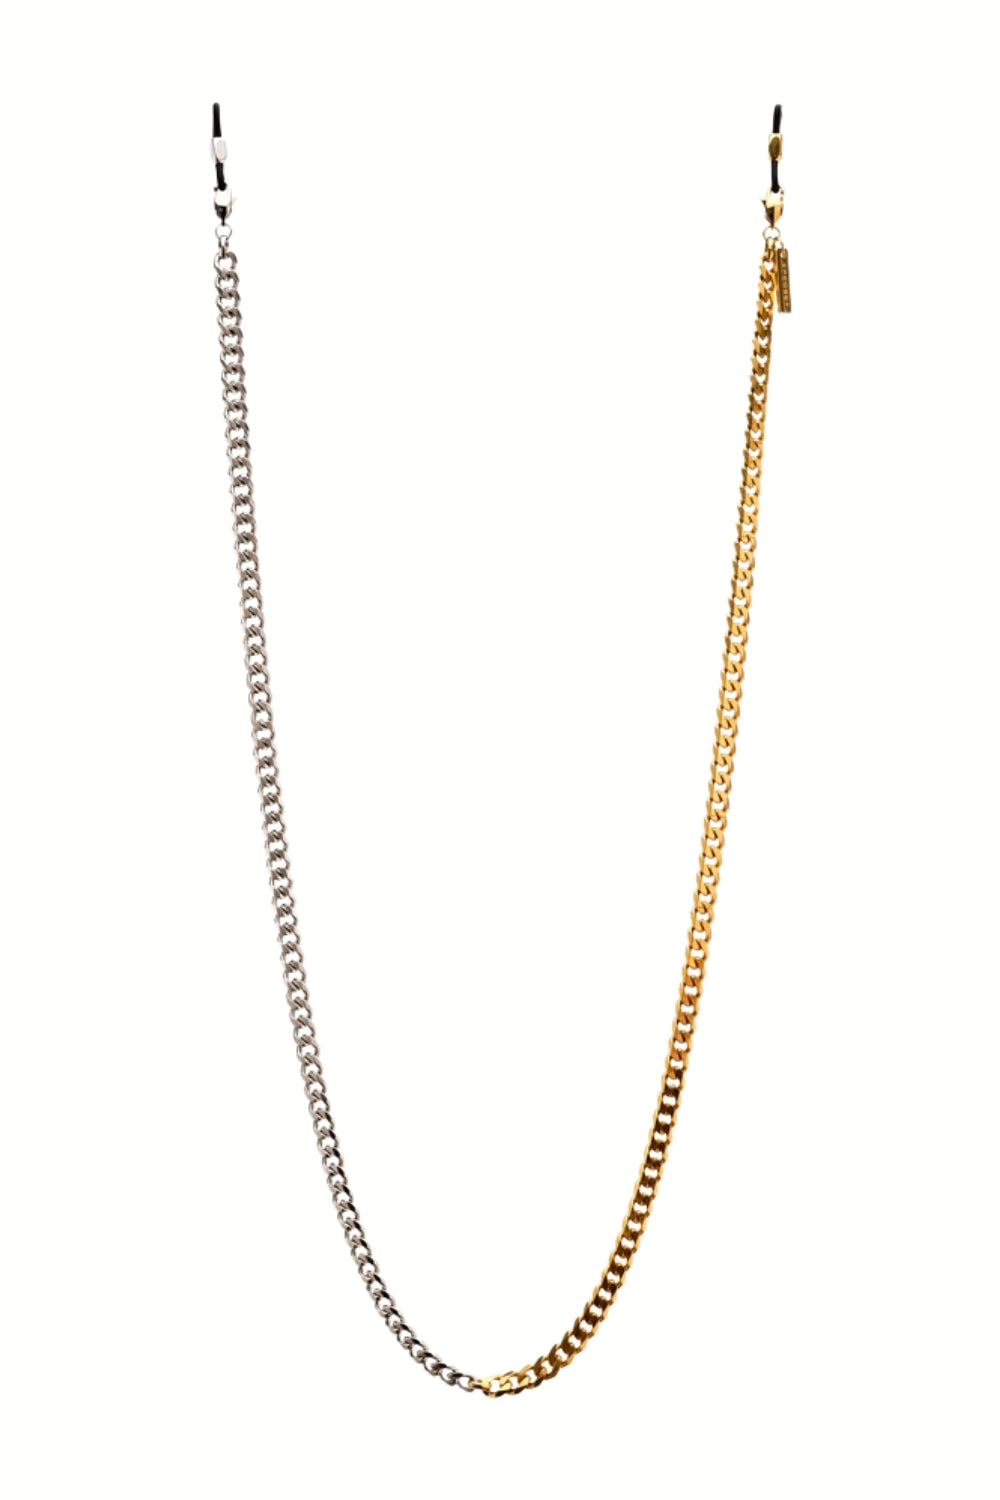 B-SIDES - Two-tone Eyewear Chain in Silver and Gold | SPECSET